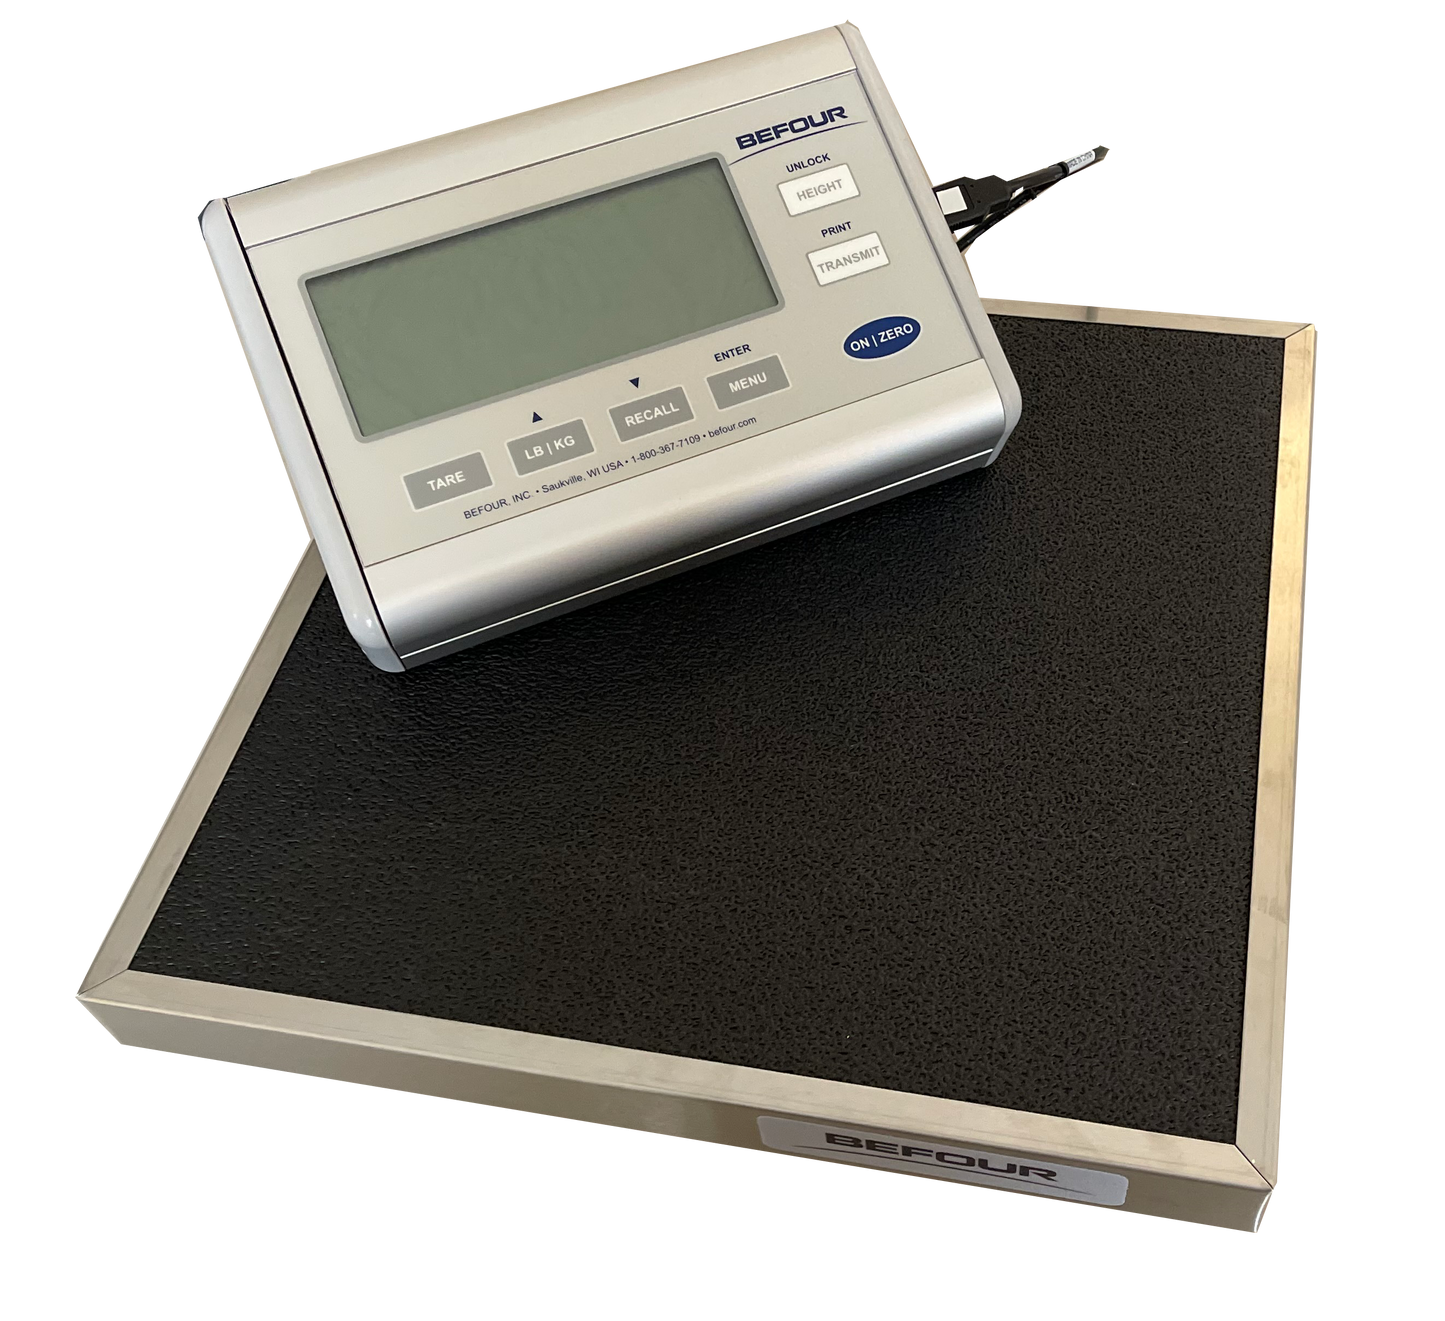 Befour Small Platform Battery Powered Digital Scale PS5700